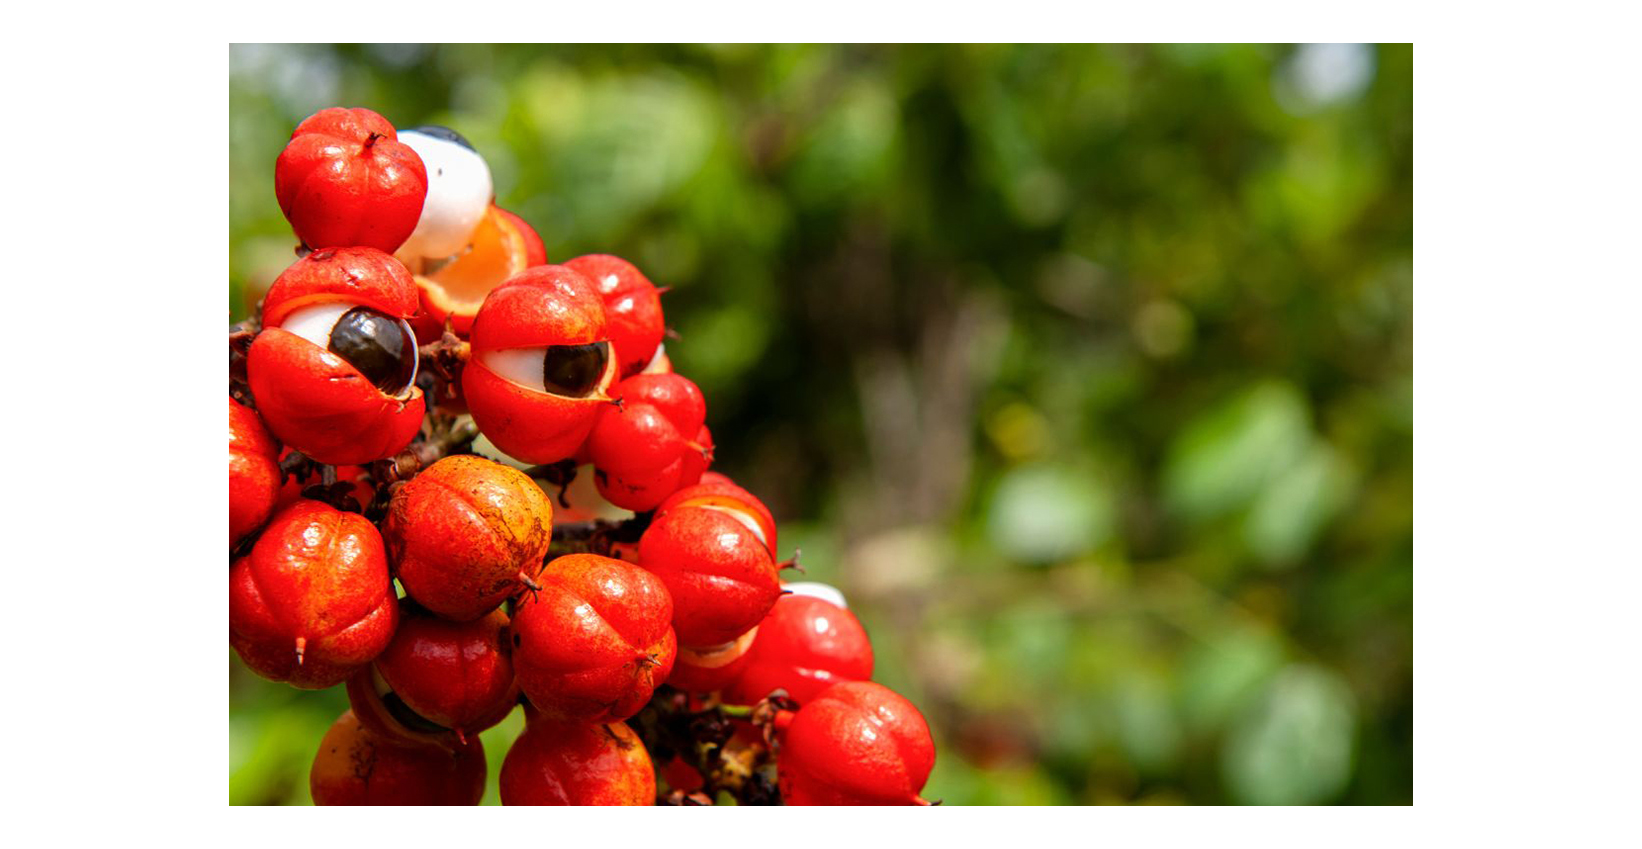 guarana supplement to boost energy levels